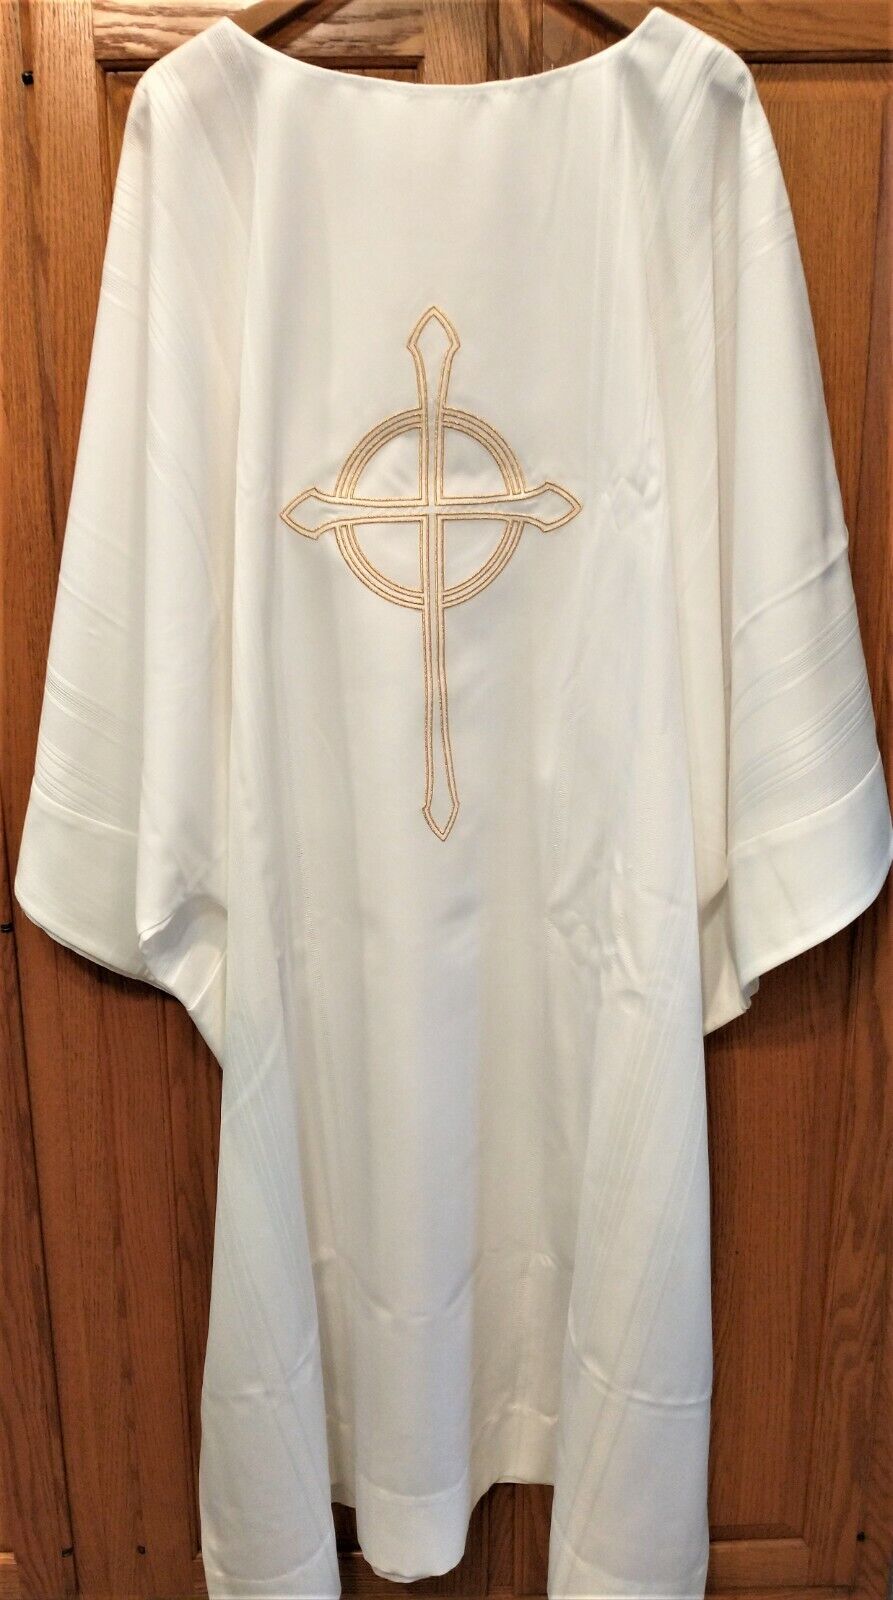 White Dalmatic with Embroidered Gold Cross from Harbro